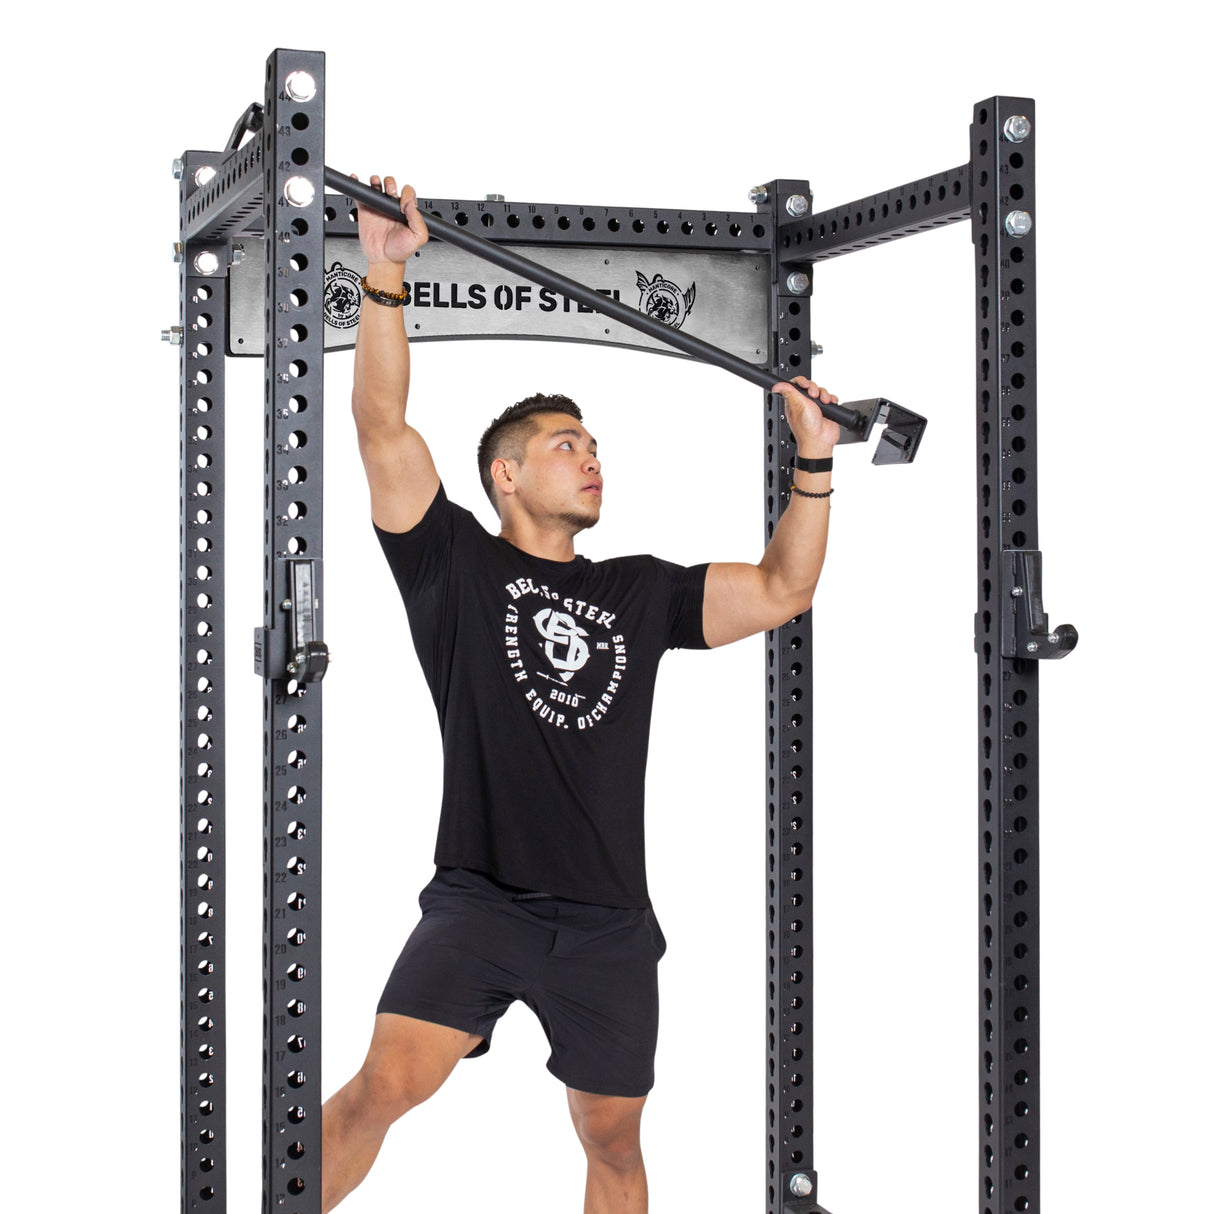 Male athlete attaching Adjustable Pull-up Bar Rack Attachment - Manticore to power rack